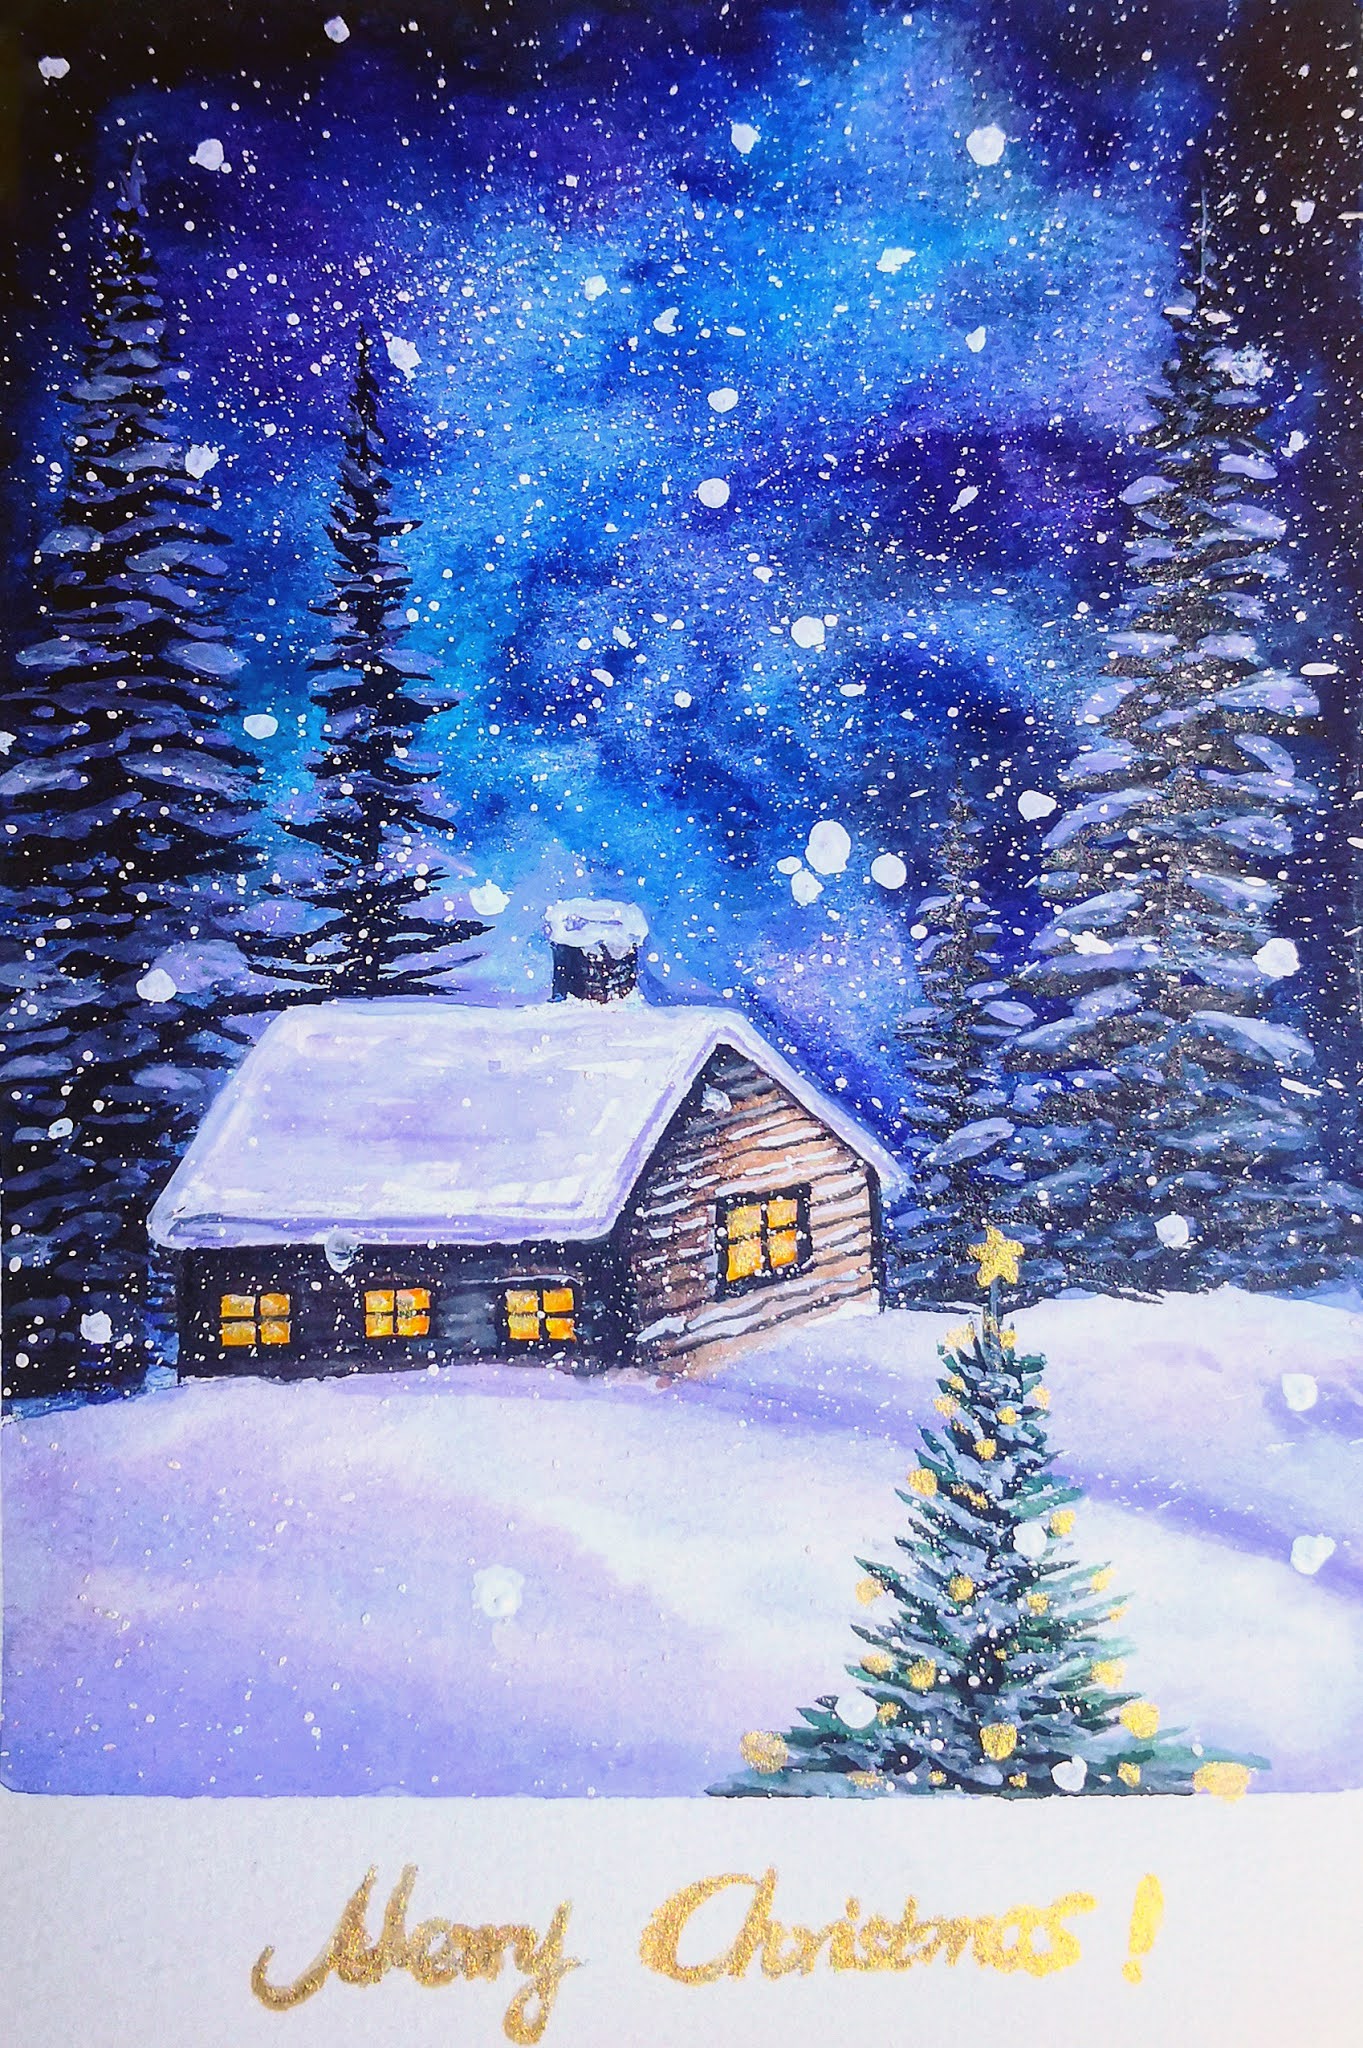 Watercolor Christmas snowing winter landscape tutorial step by step, come to see my online class